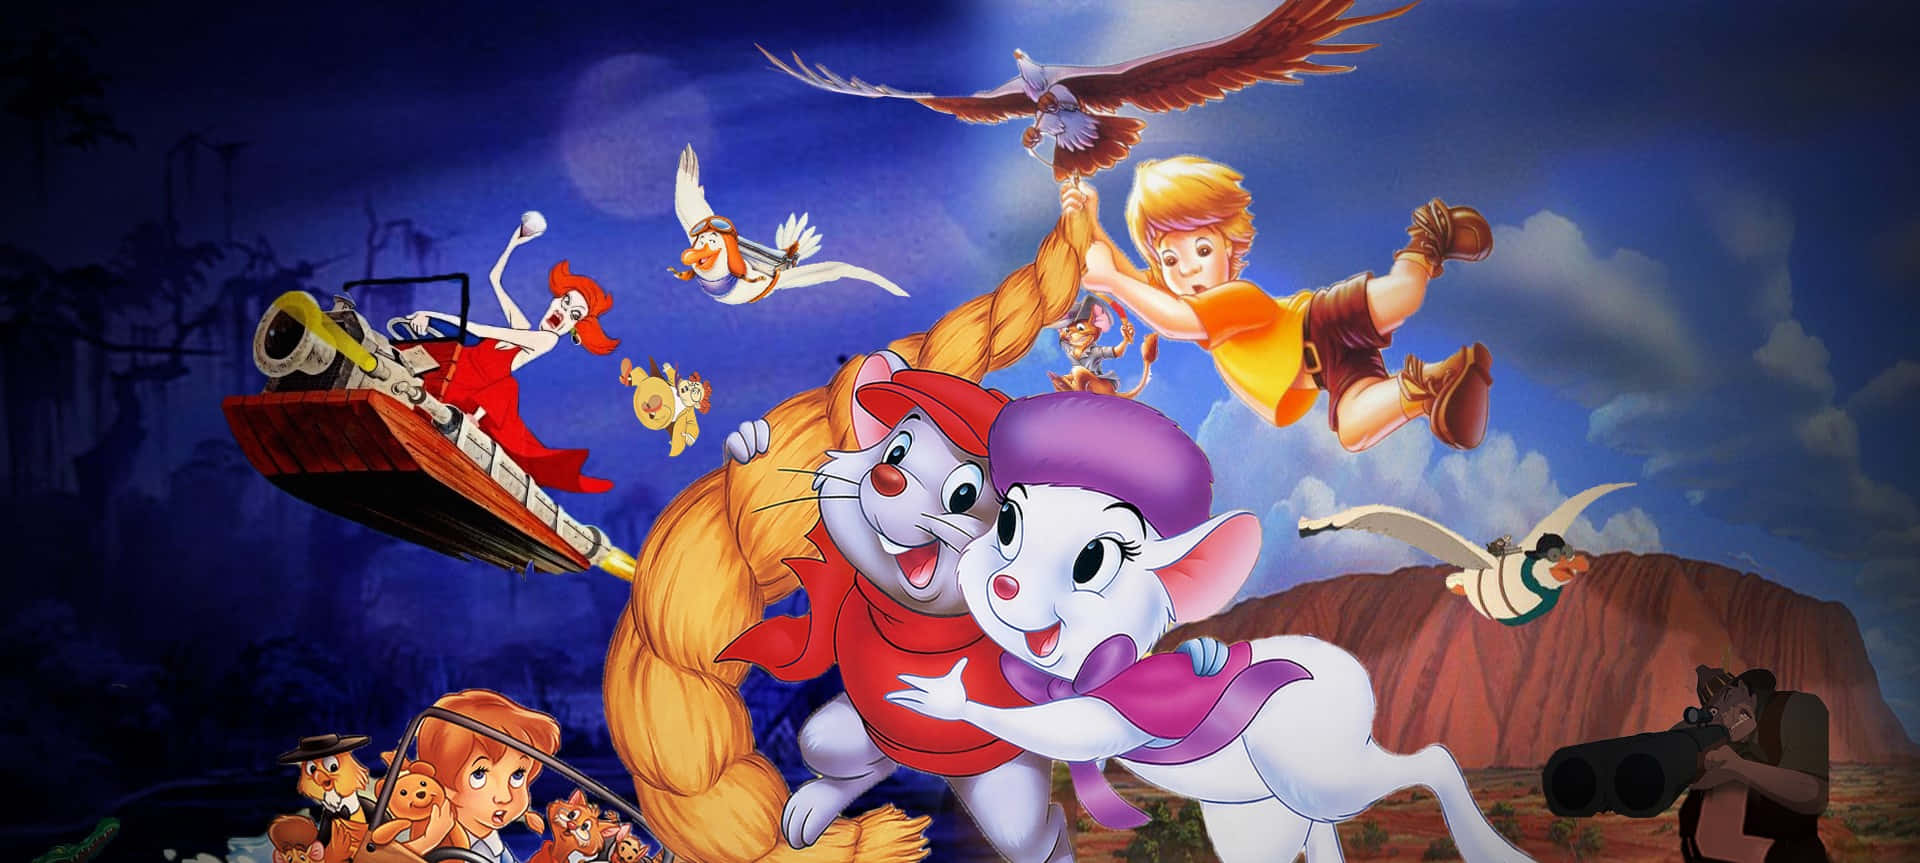 The Rescuers Down Under - Bernard and Bianca's thrilling adventure Wallpaper